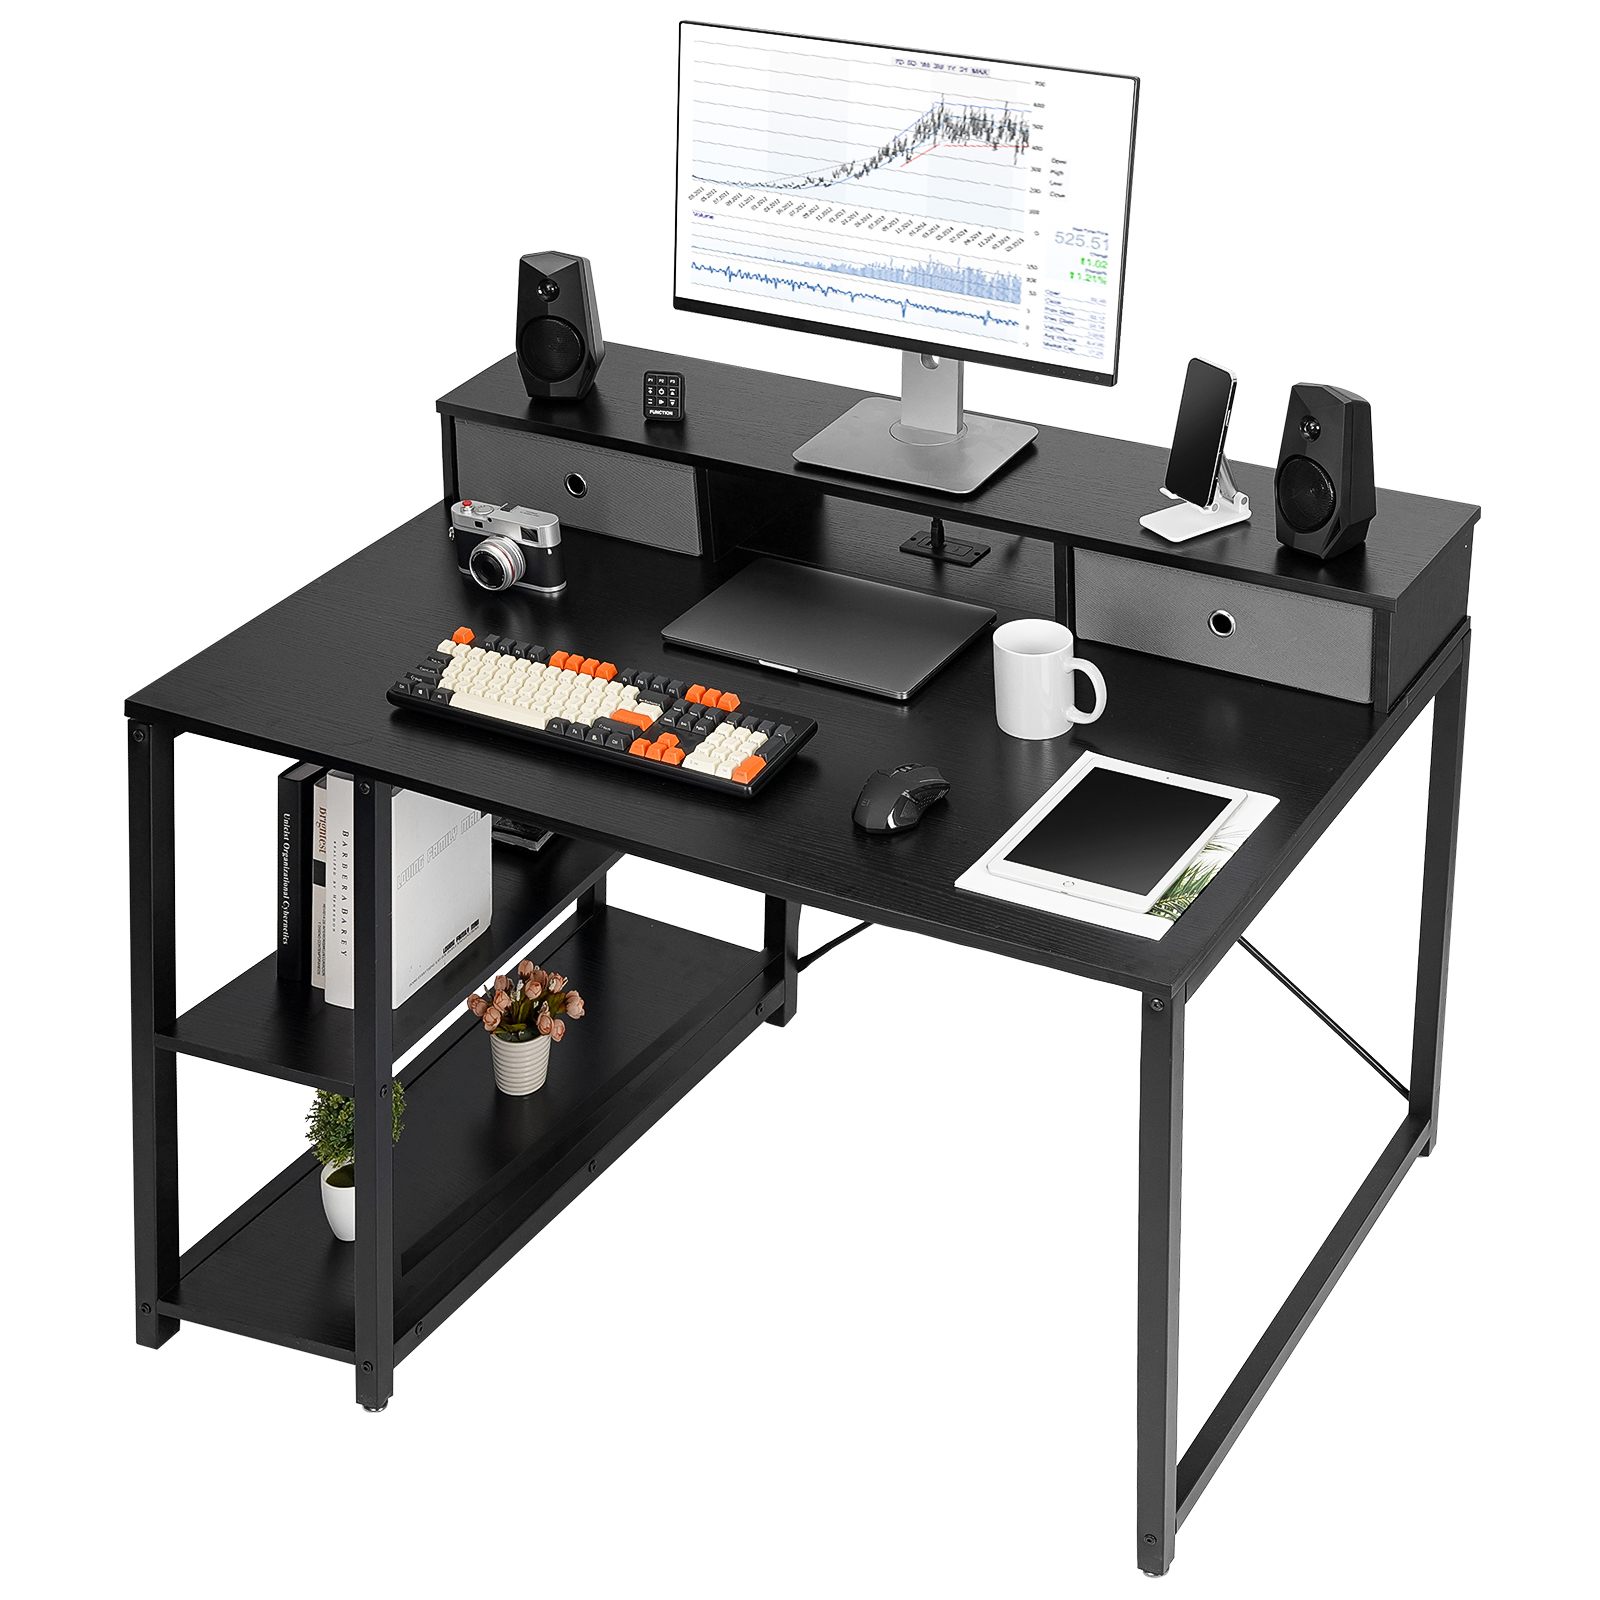 TOPSKY 47”x 31.5” Computer Desk with Drawers, Monitor Stand, Storage Shelf, 3-Port Charging Station CT-8028